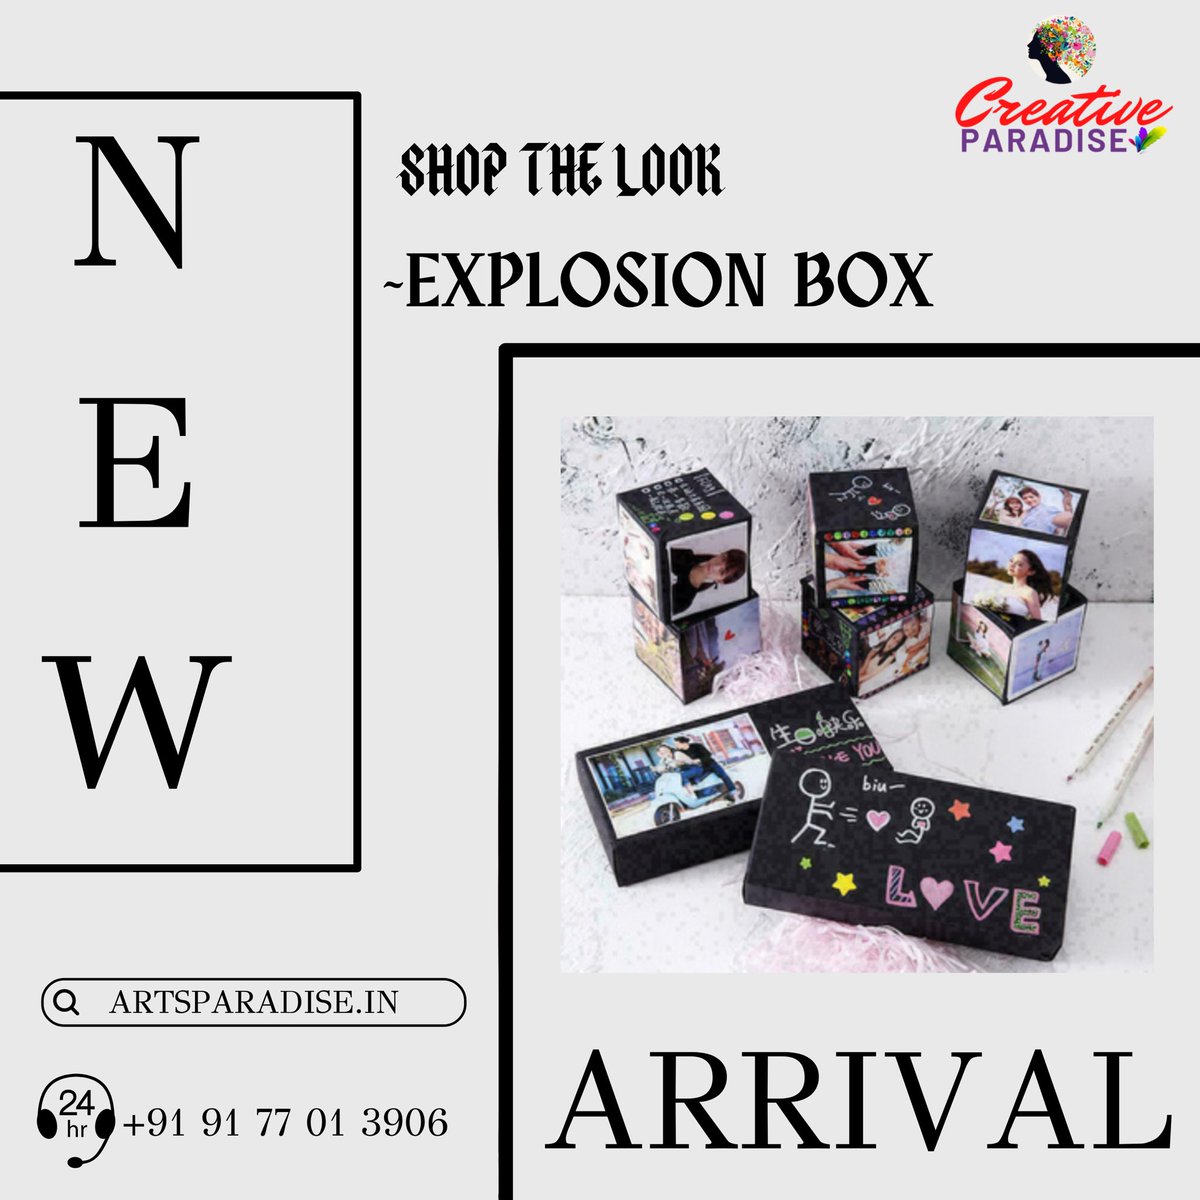 🎁FIND A PERFECT GIFT'S AT
CREATIVE PARADISE ⤵
PRODUCT NAME :-*EXPLOSION BOX* 
(DELIVERY IN 7 DAYS)

🌐 Order at -  artsparadise.in

🏬 Shop at our offline store - Beside RK Eye Hospital, Repalle, Bapatla district, Andhra Pradesh

📞 Call us at - 9177013906, 9177003905